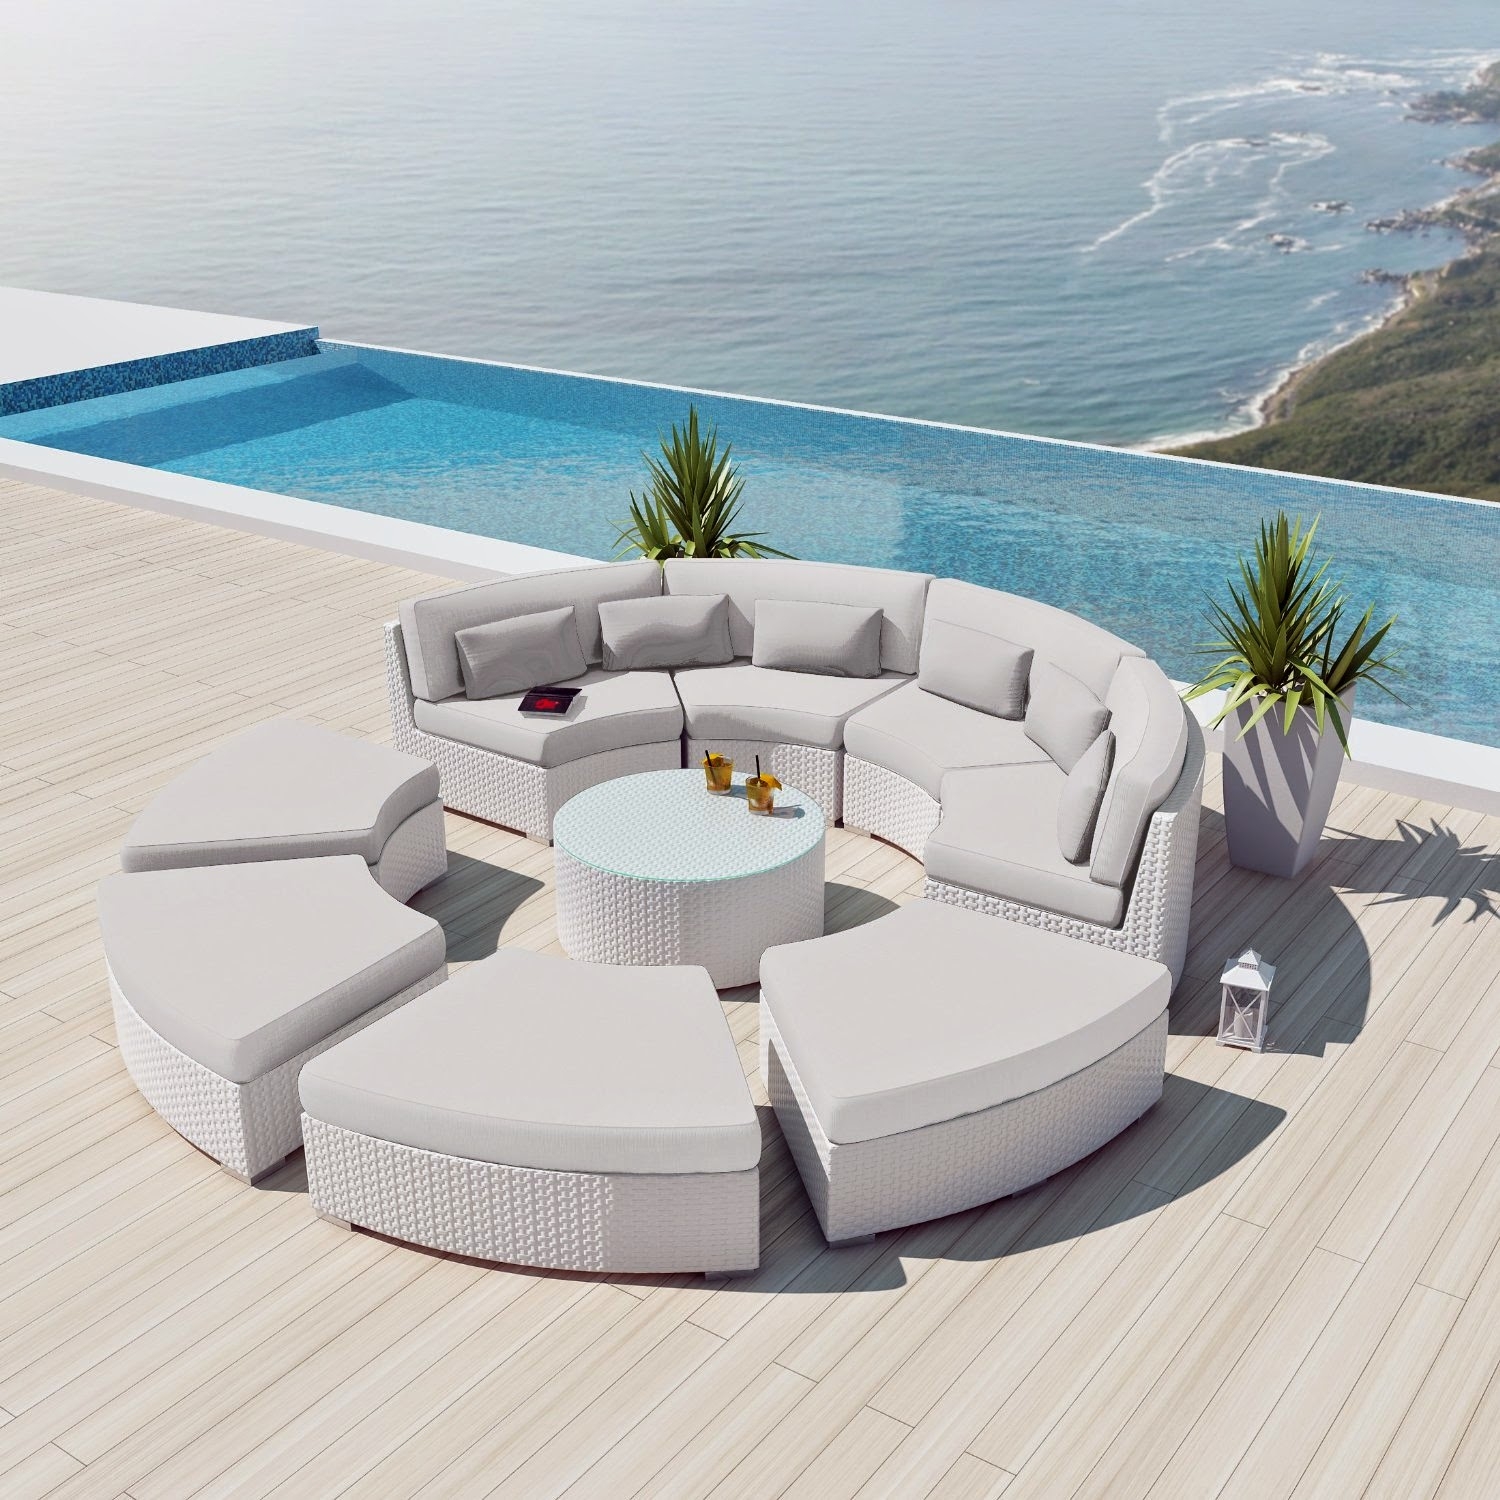 NEW Uduka Modavi 9pcs Outdoor Round Sectional Patio Furniture White Wicker Sofa Set Off White All Weather Couch